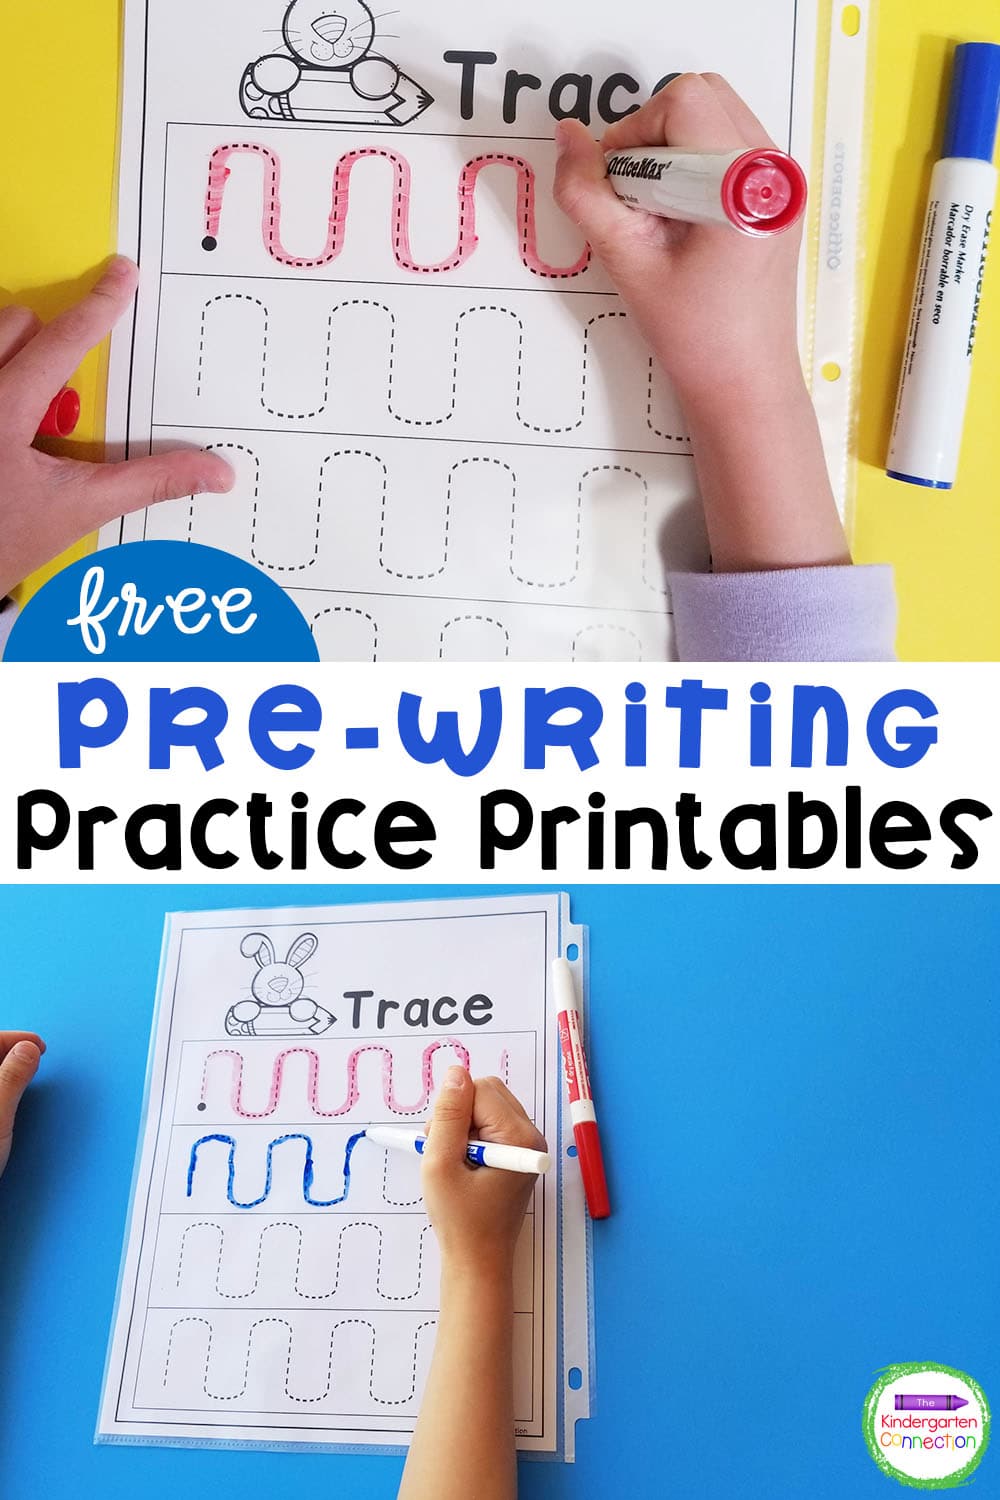 These free pre-writing printables give kids practice with common strokes that are found in letters, and can be used in many different ways!